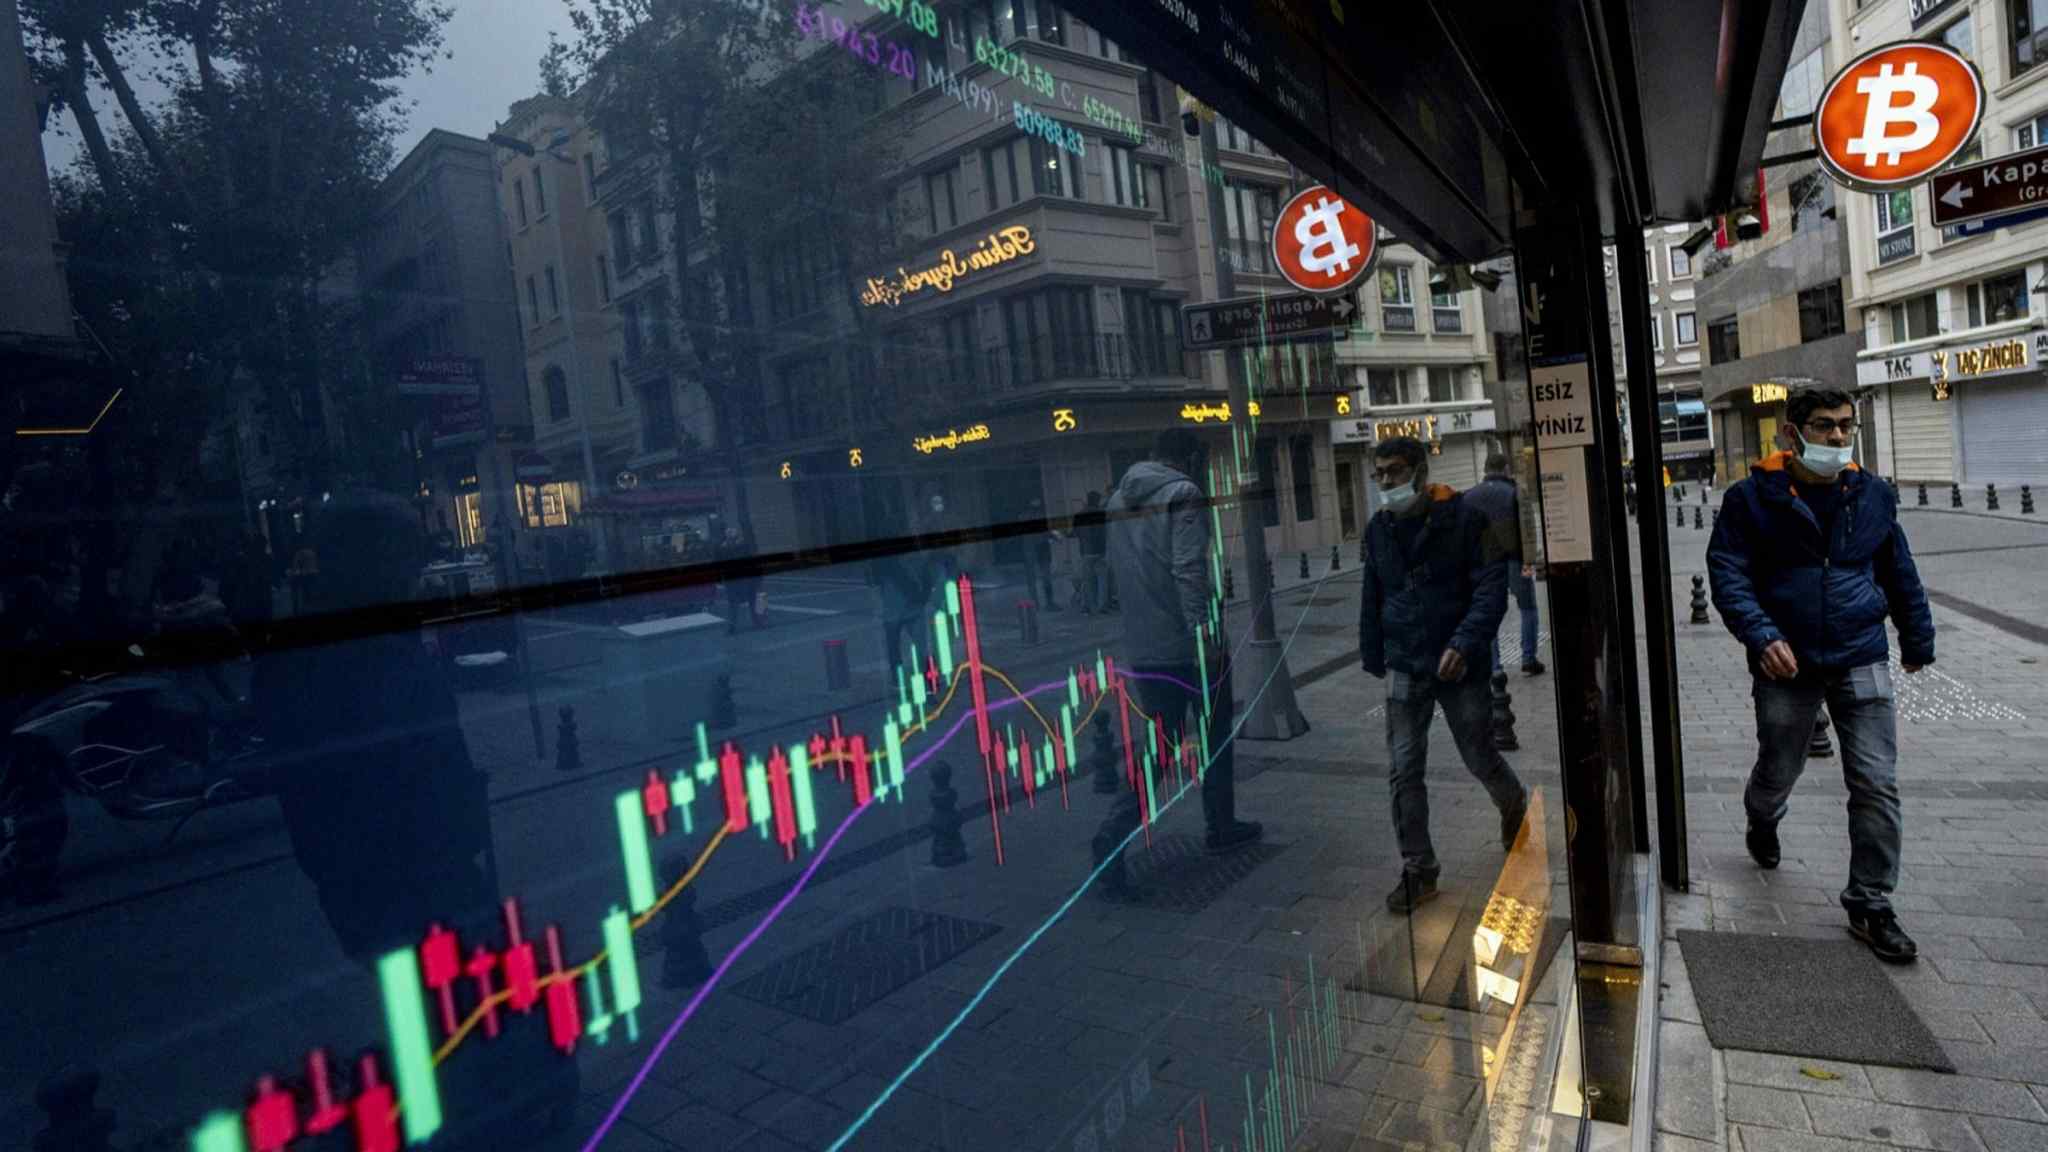 Turks flock to cryptocurrencies in search of stability